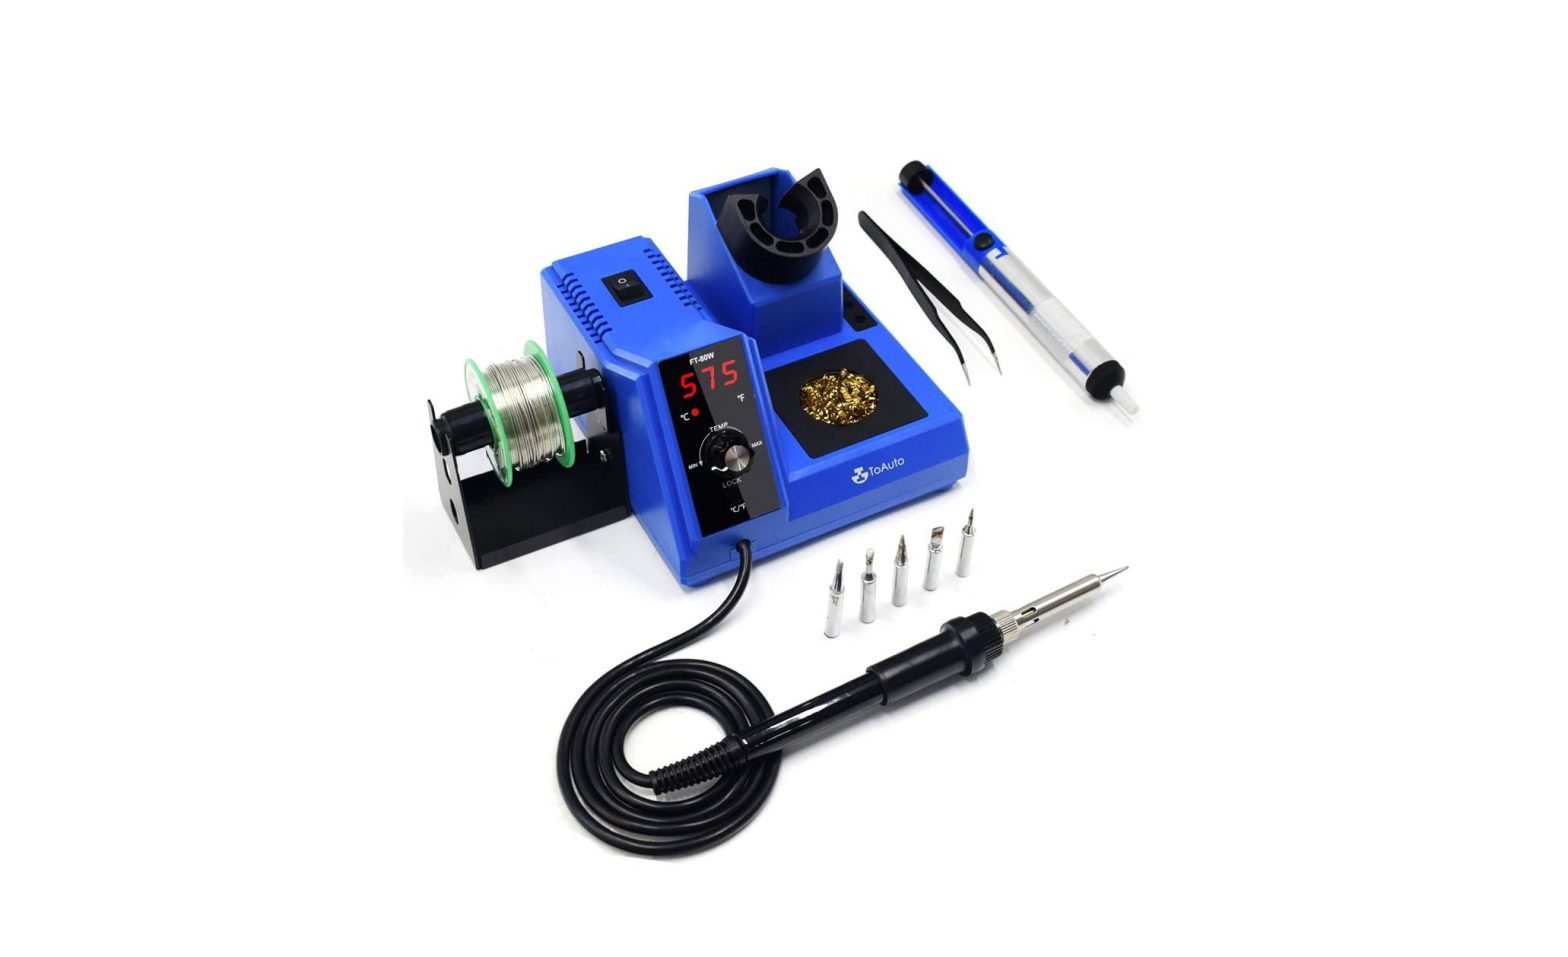 ToAuto Soldering Station FT-80W User Manual